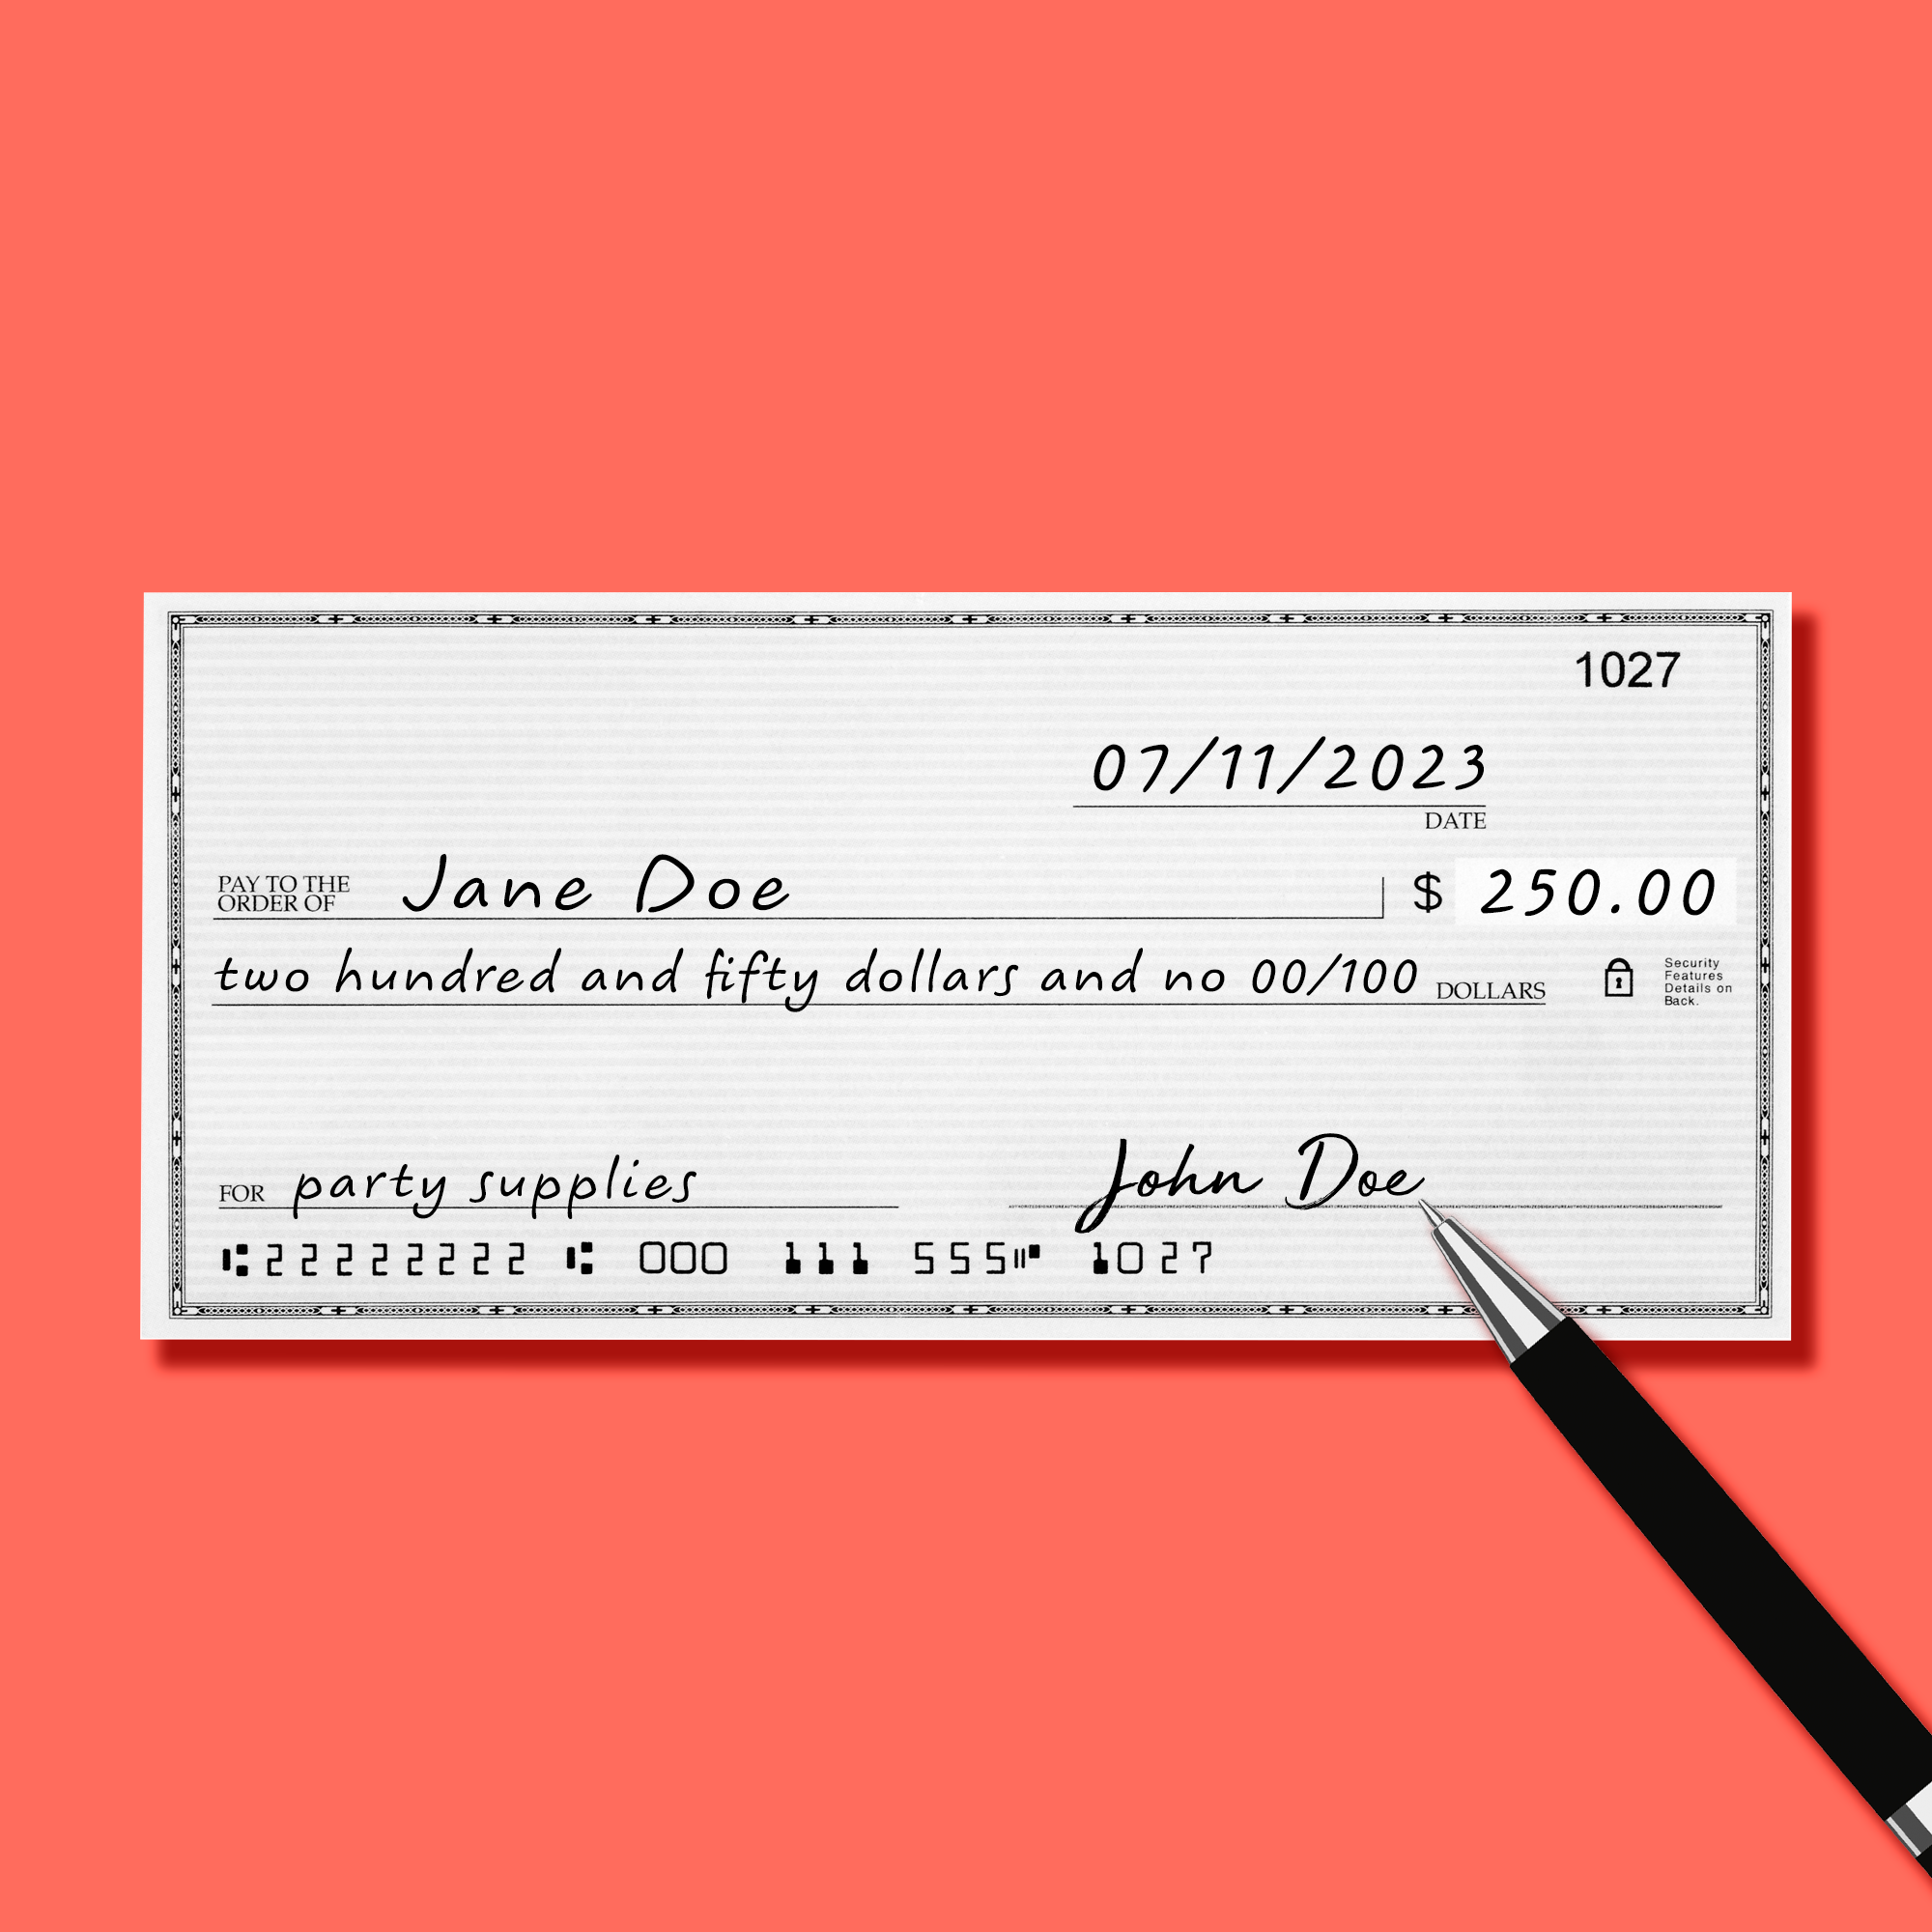 How to Write A Check: Fill Out A Check